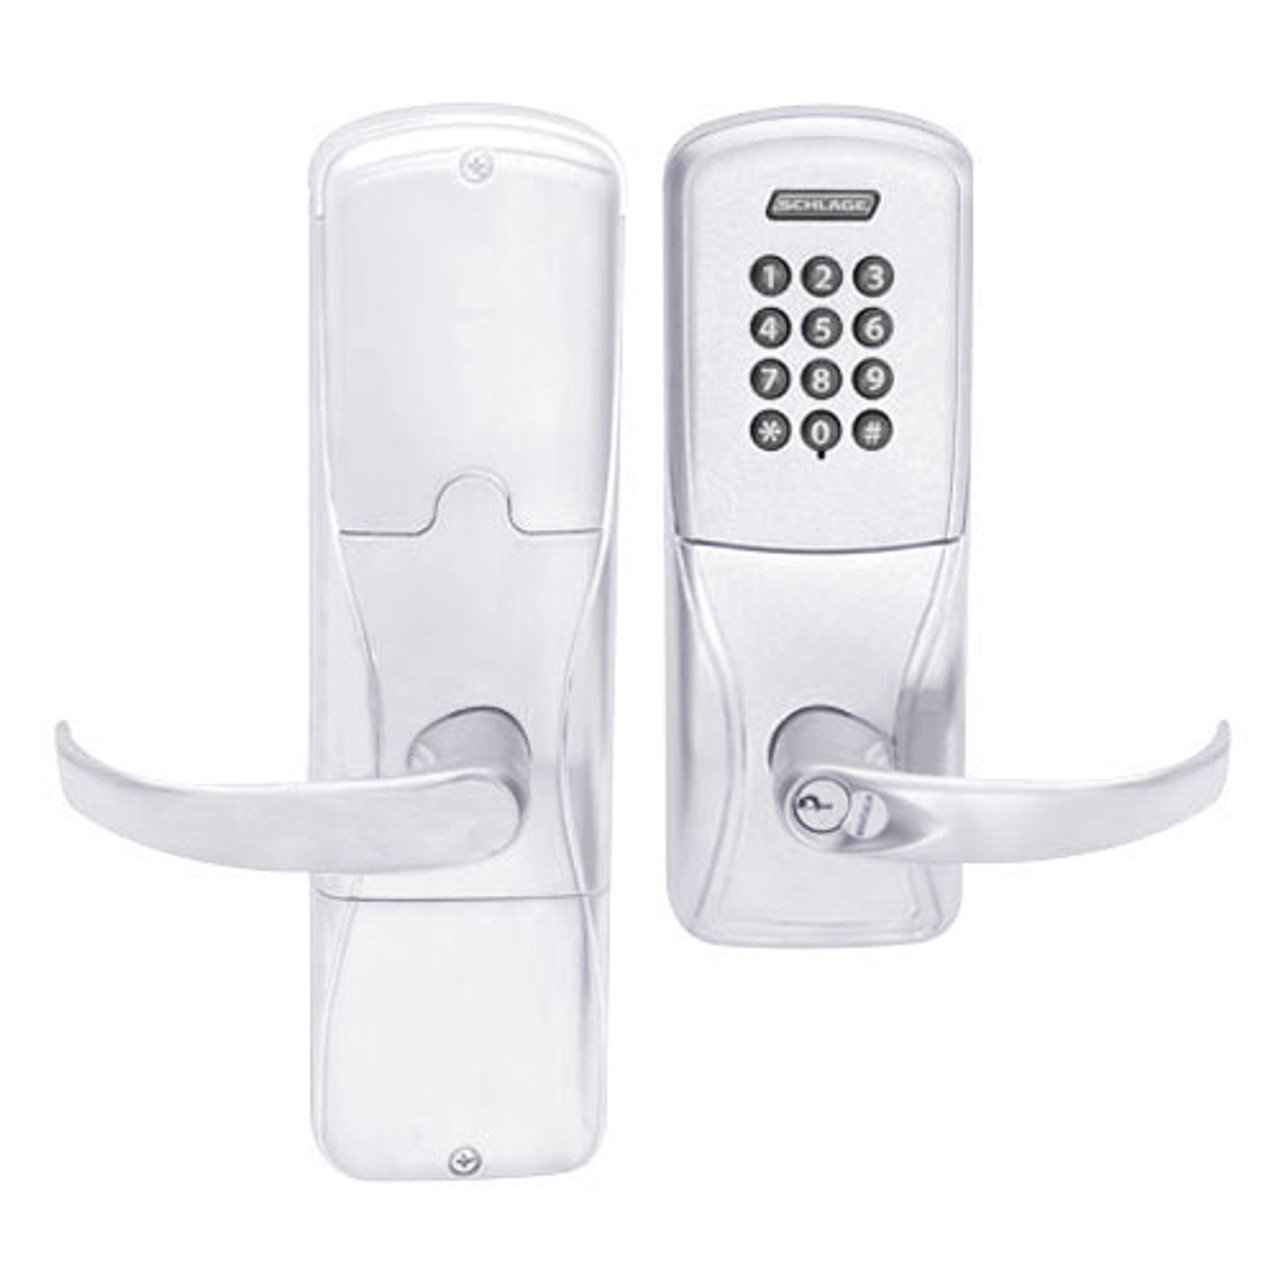 AD200-MD-40-KP-SPA-GD-29R-625 Schlage Privacy Mortise Deadbolt Keypad Lock with Sparta Lever in Bright Chrome